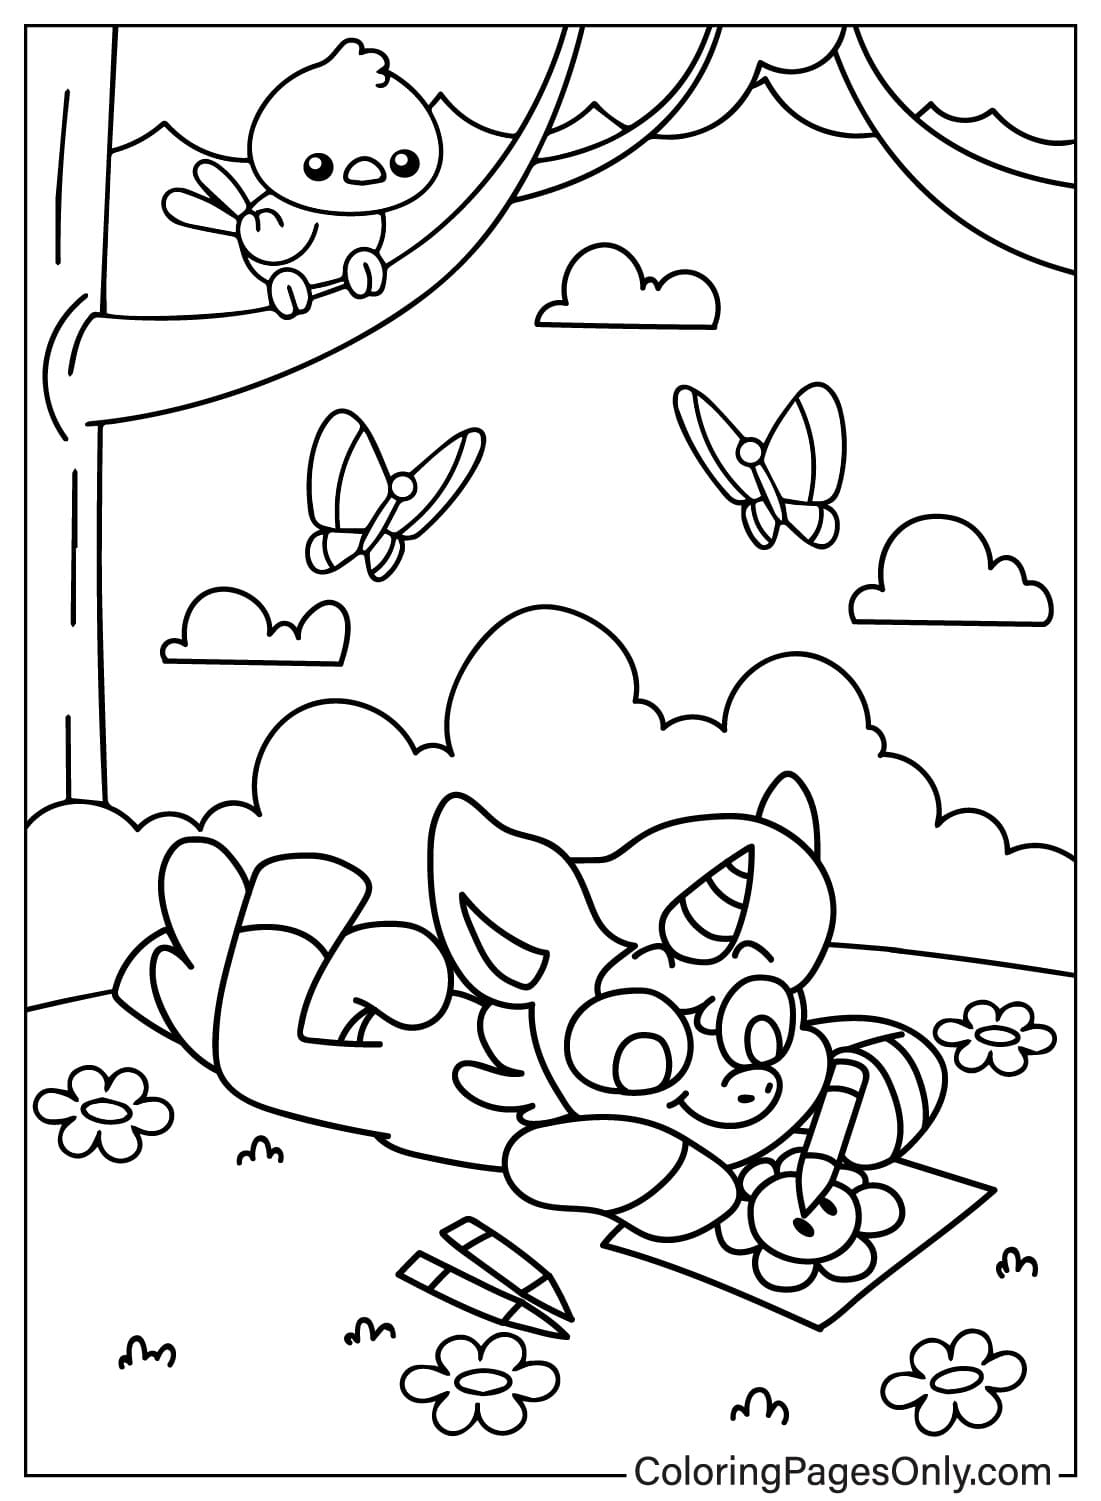 CraftyCorn Lying Drawing Painting in the Grass Coloring Page from CraftyCorn